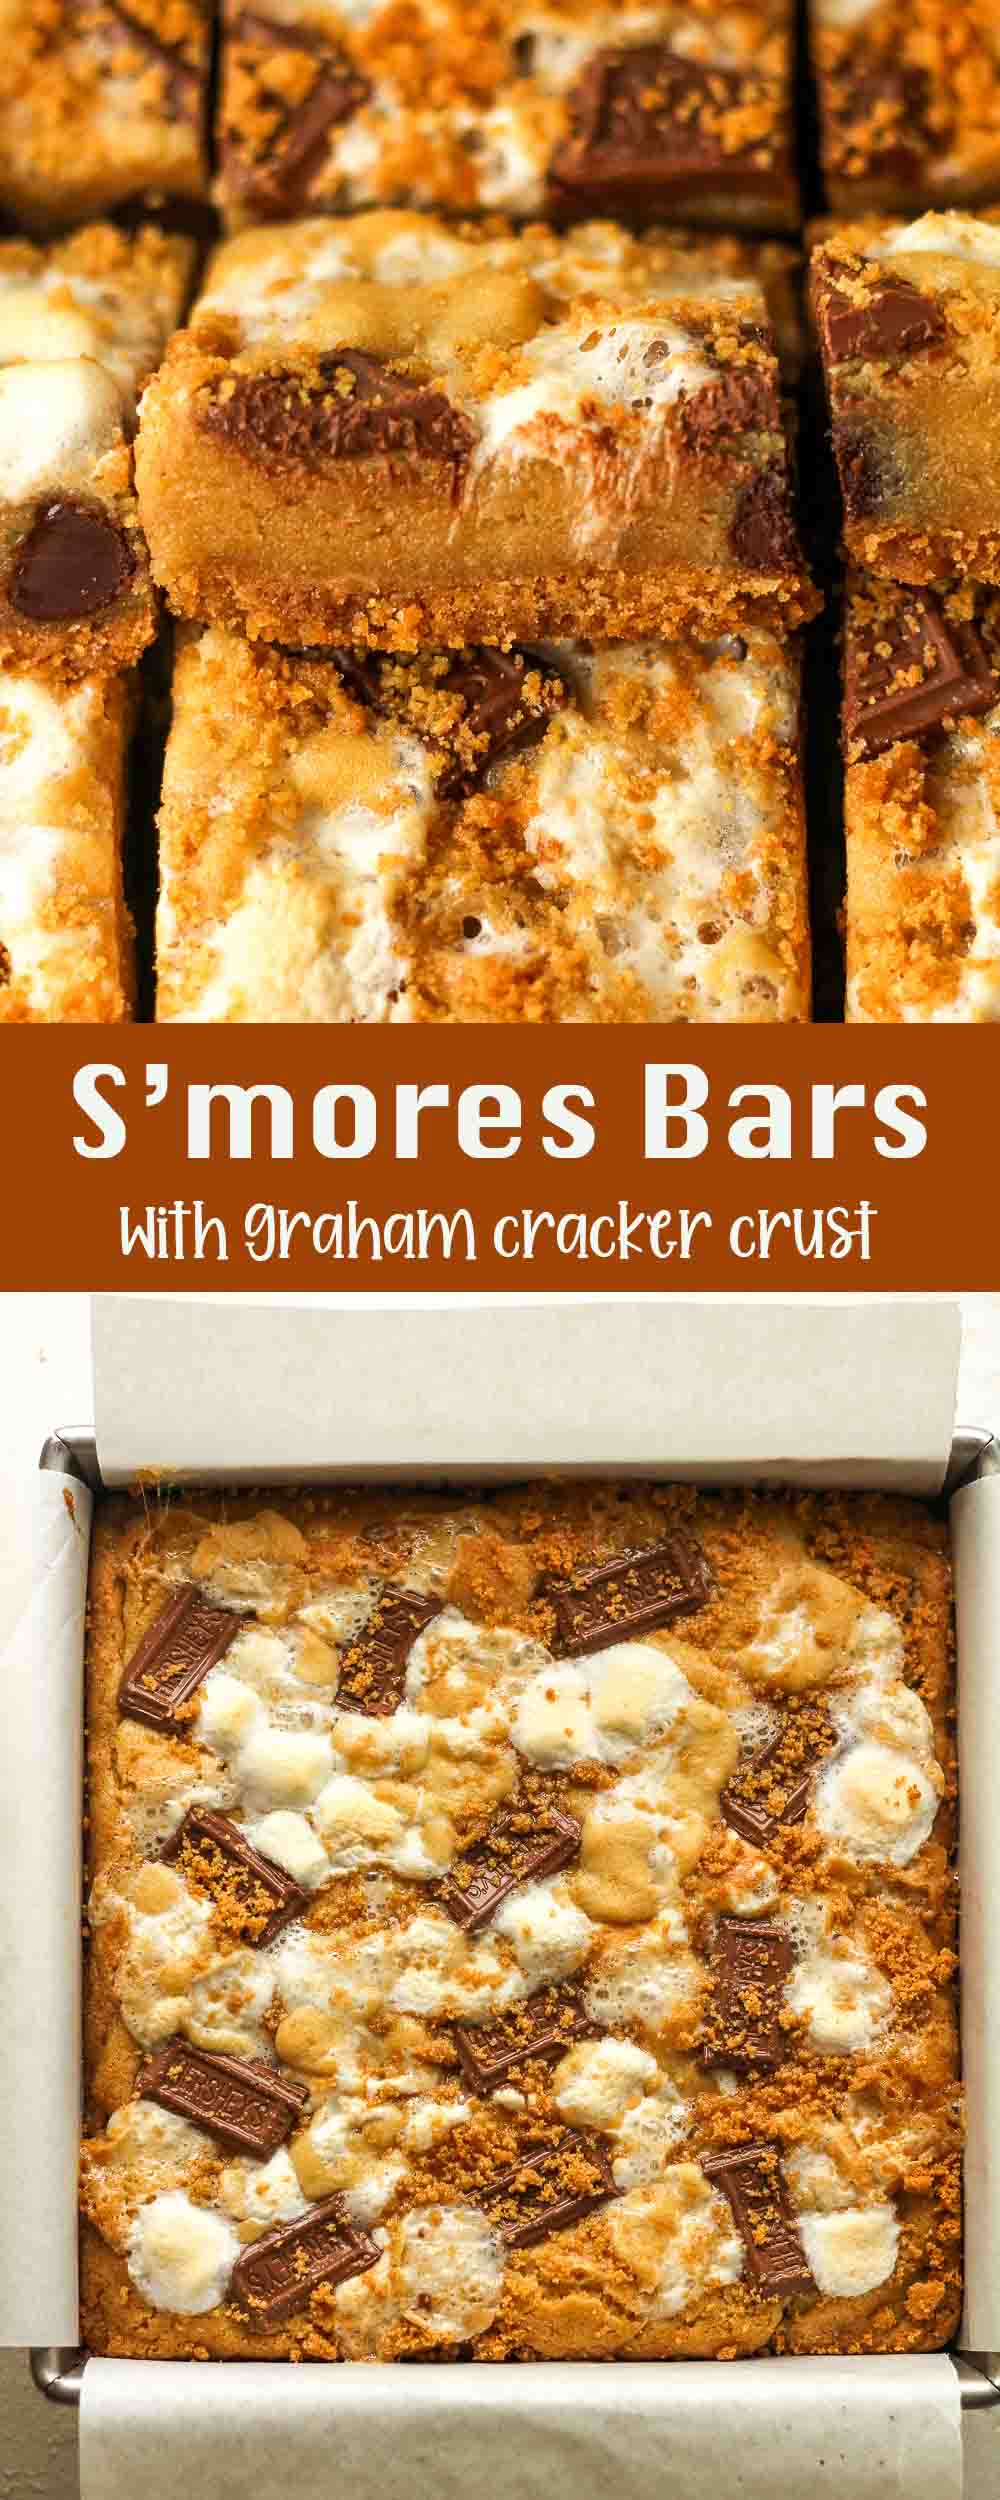 Two photos of S'mores Bars with a graham cracker crust.